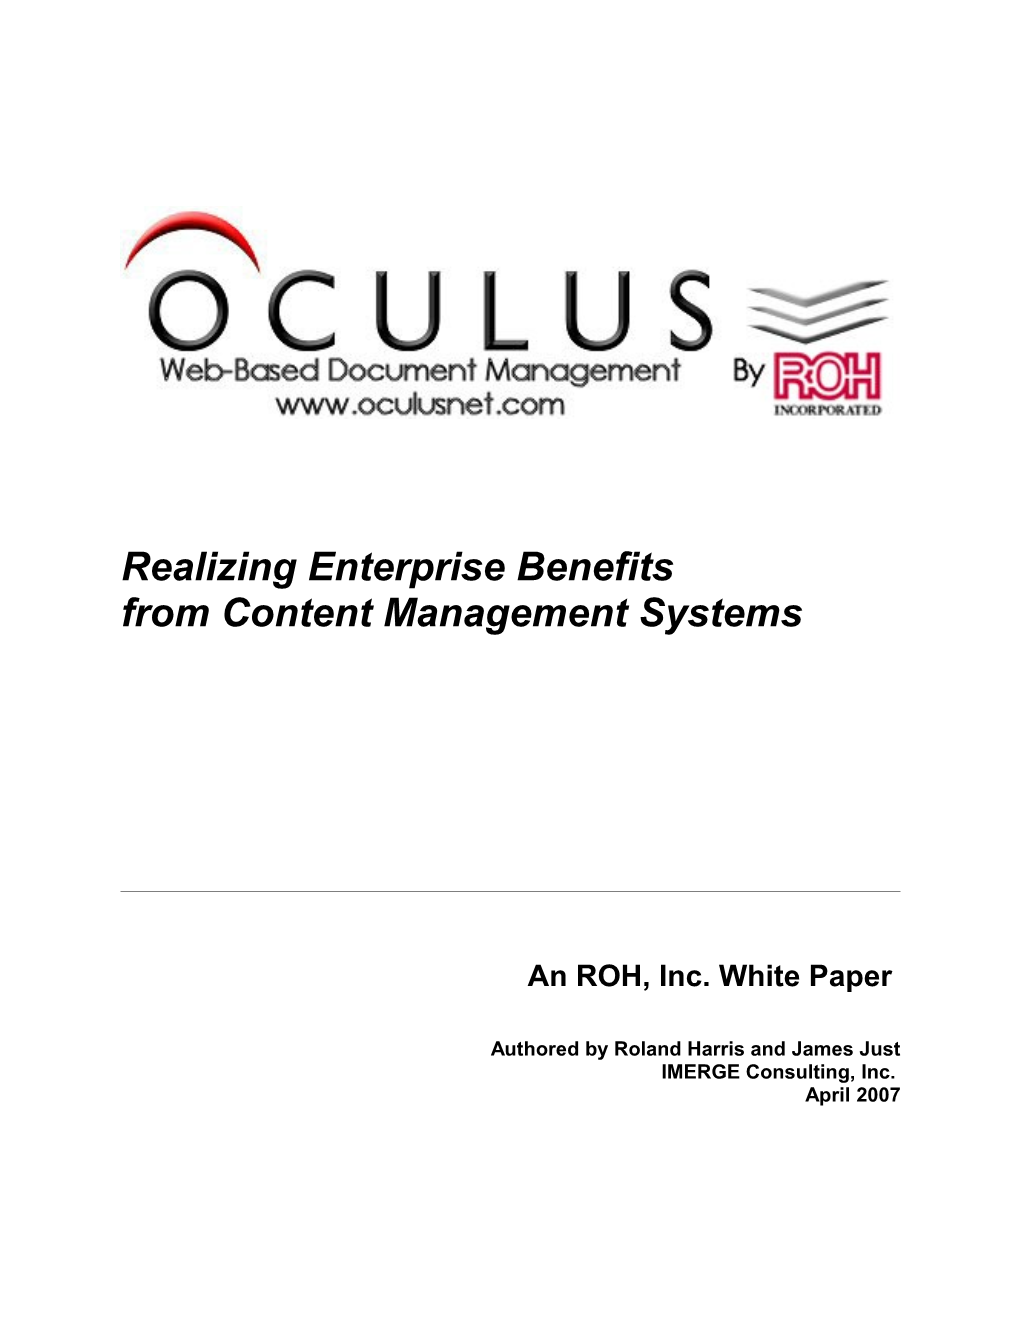 Realizing Enterprise Benefits from Content Management Systems